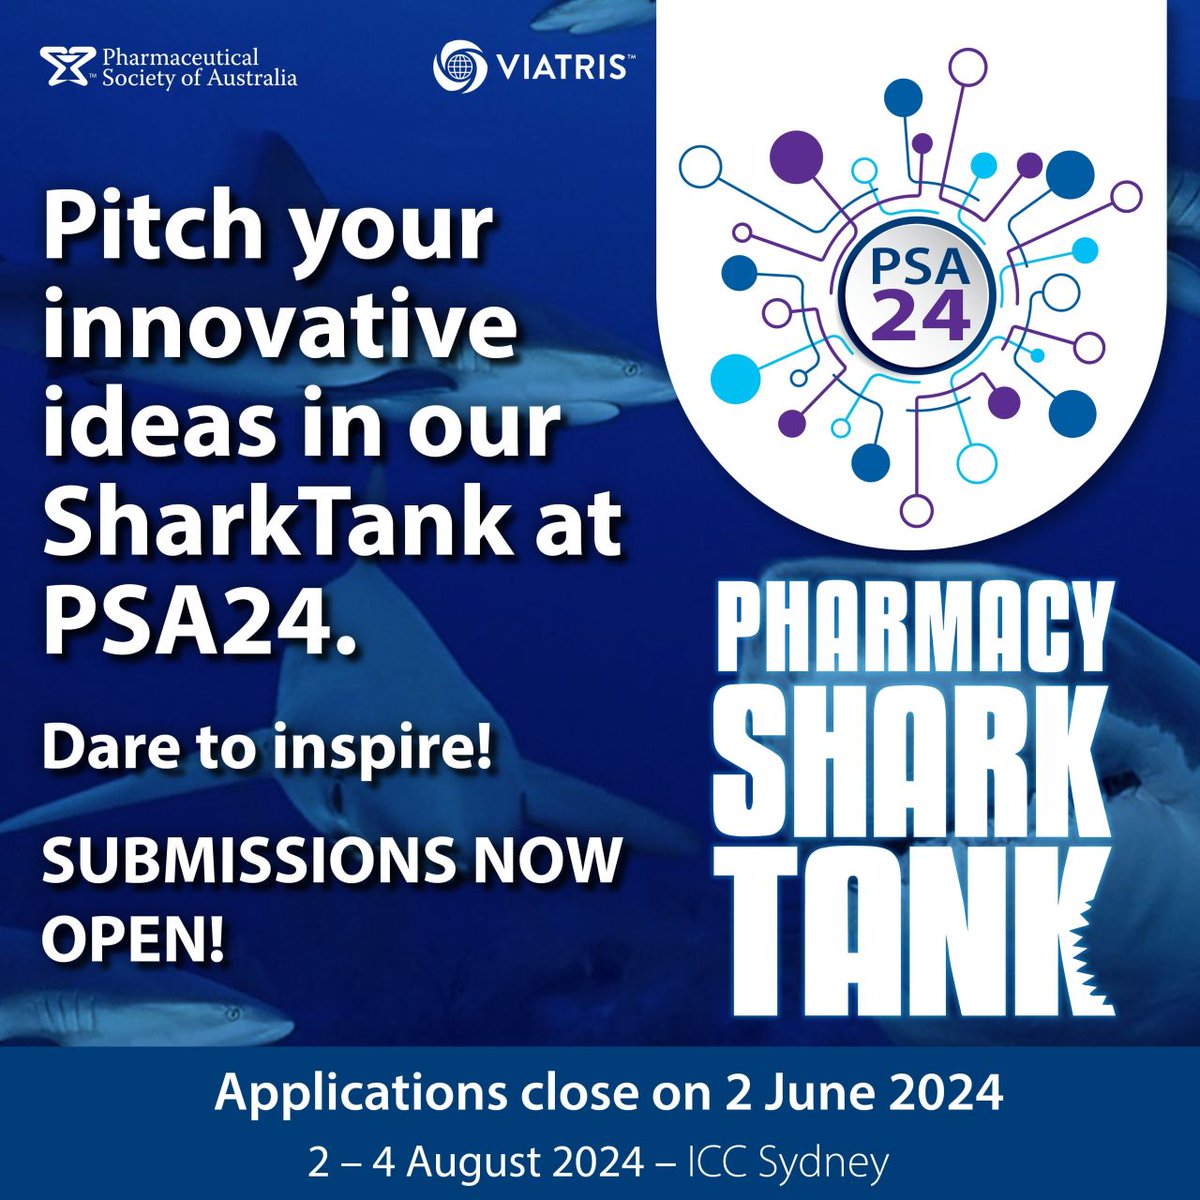 Got a game-changing idea for pharmacy? Dive into PSA24's SharkTank! Pitch and make waves. 

Submissions open until 2 June - apply now!

For more information: buff.ly/3vrQv5k

#PSA24 #SharkTank

@PSA_National